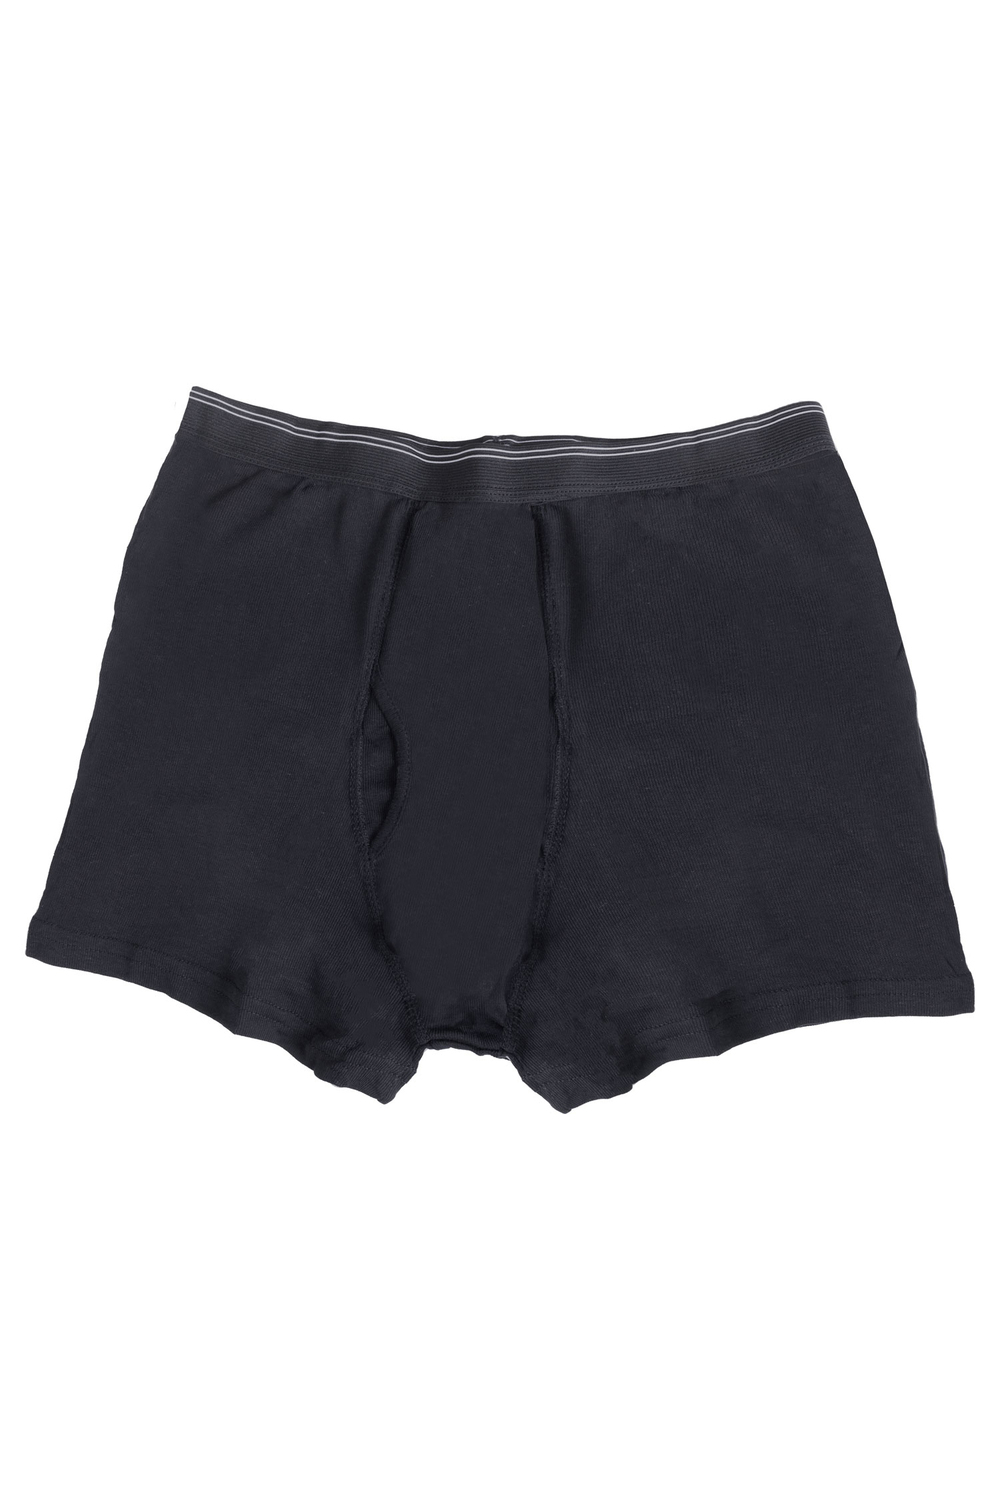 https://www.rossy.ca/media/A2W/products/essentials-by-7-apparel-boxer-briefs-pk-of-3-76754-4.jpg